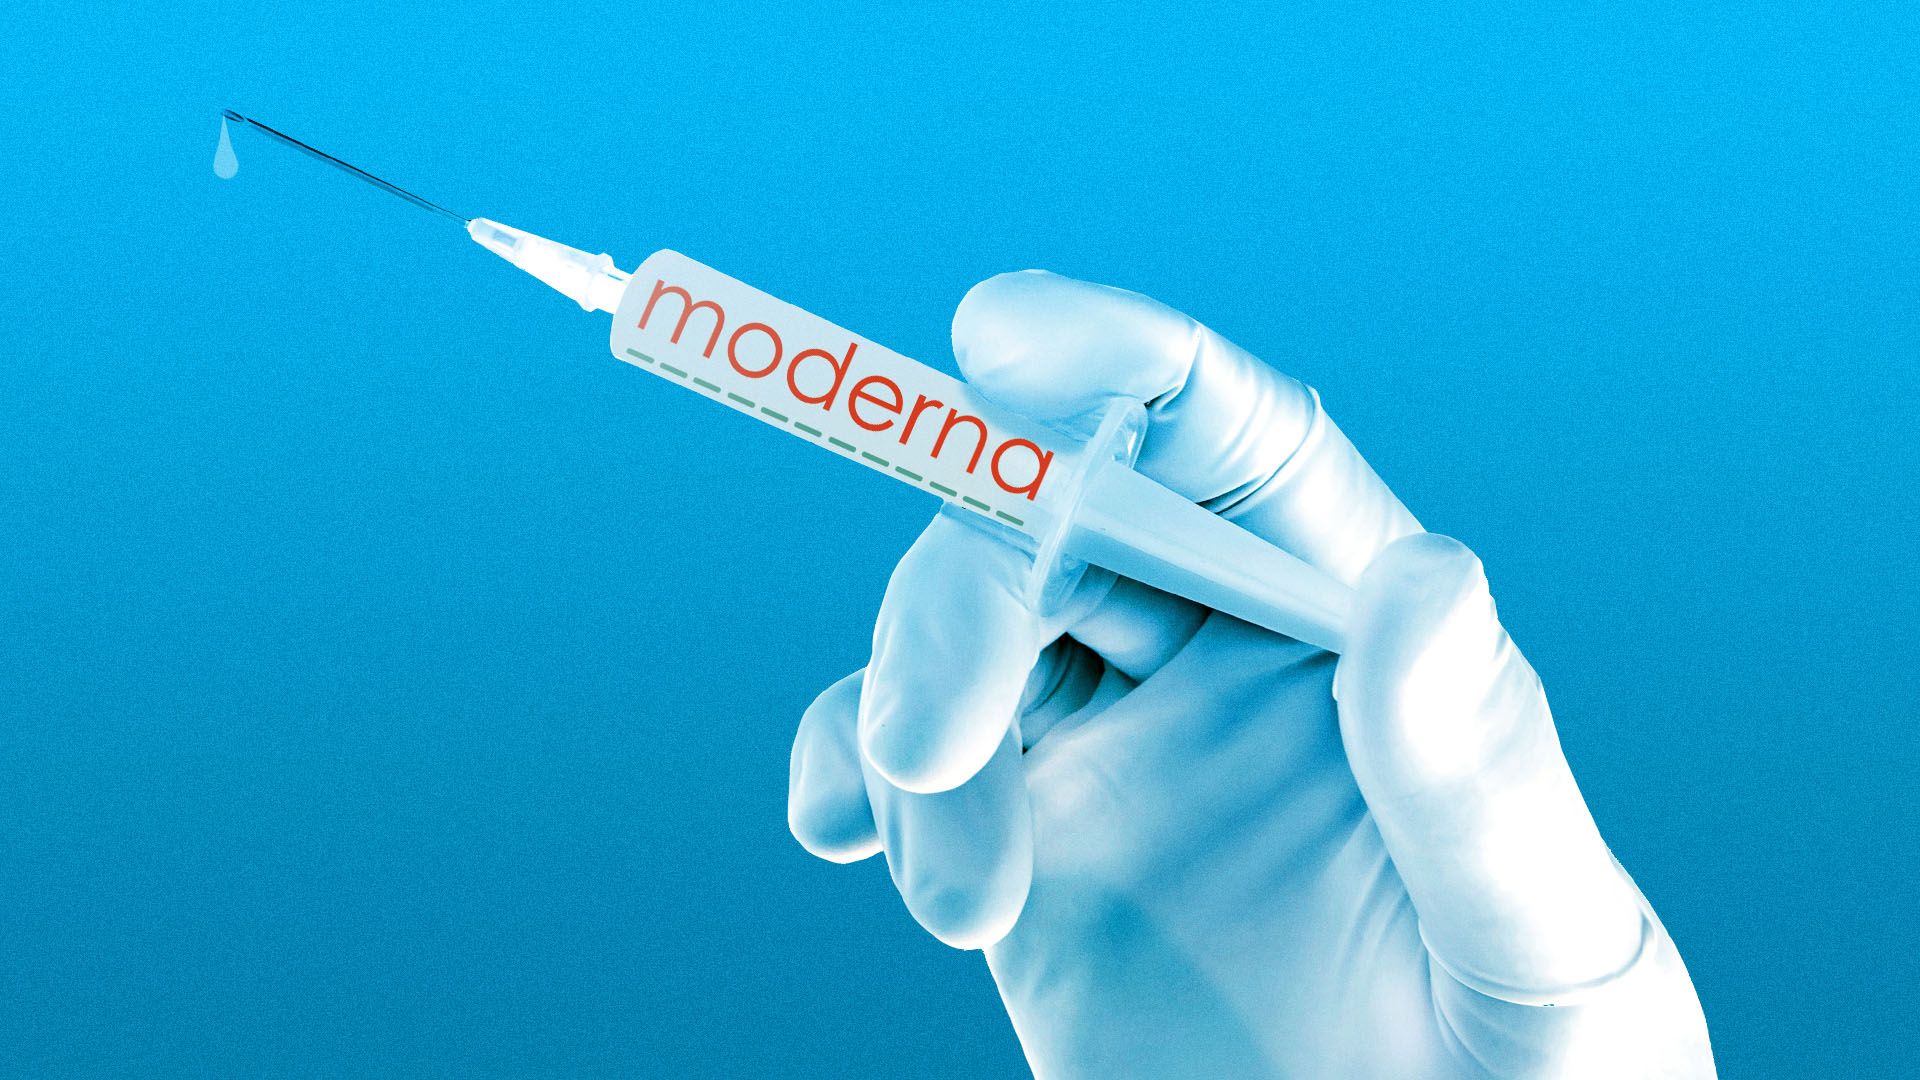 Illustration of a hand holding up a syringe that reads "Moderna" on the side.